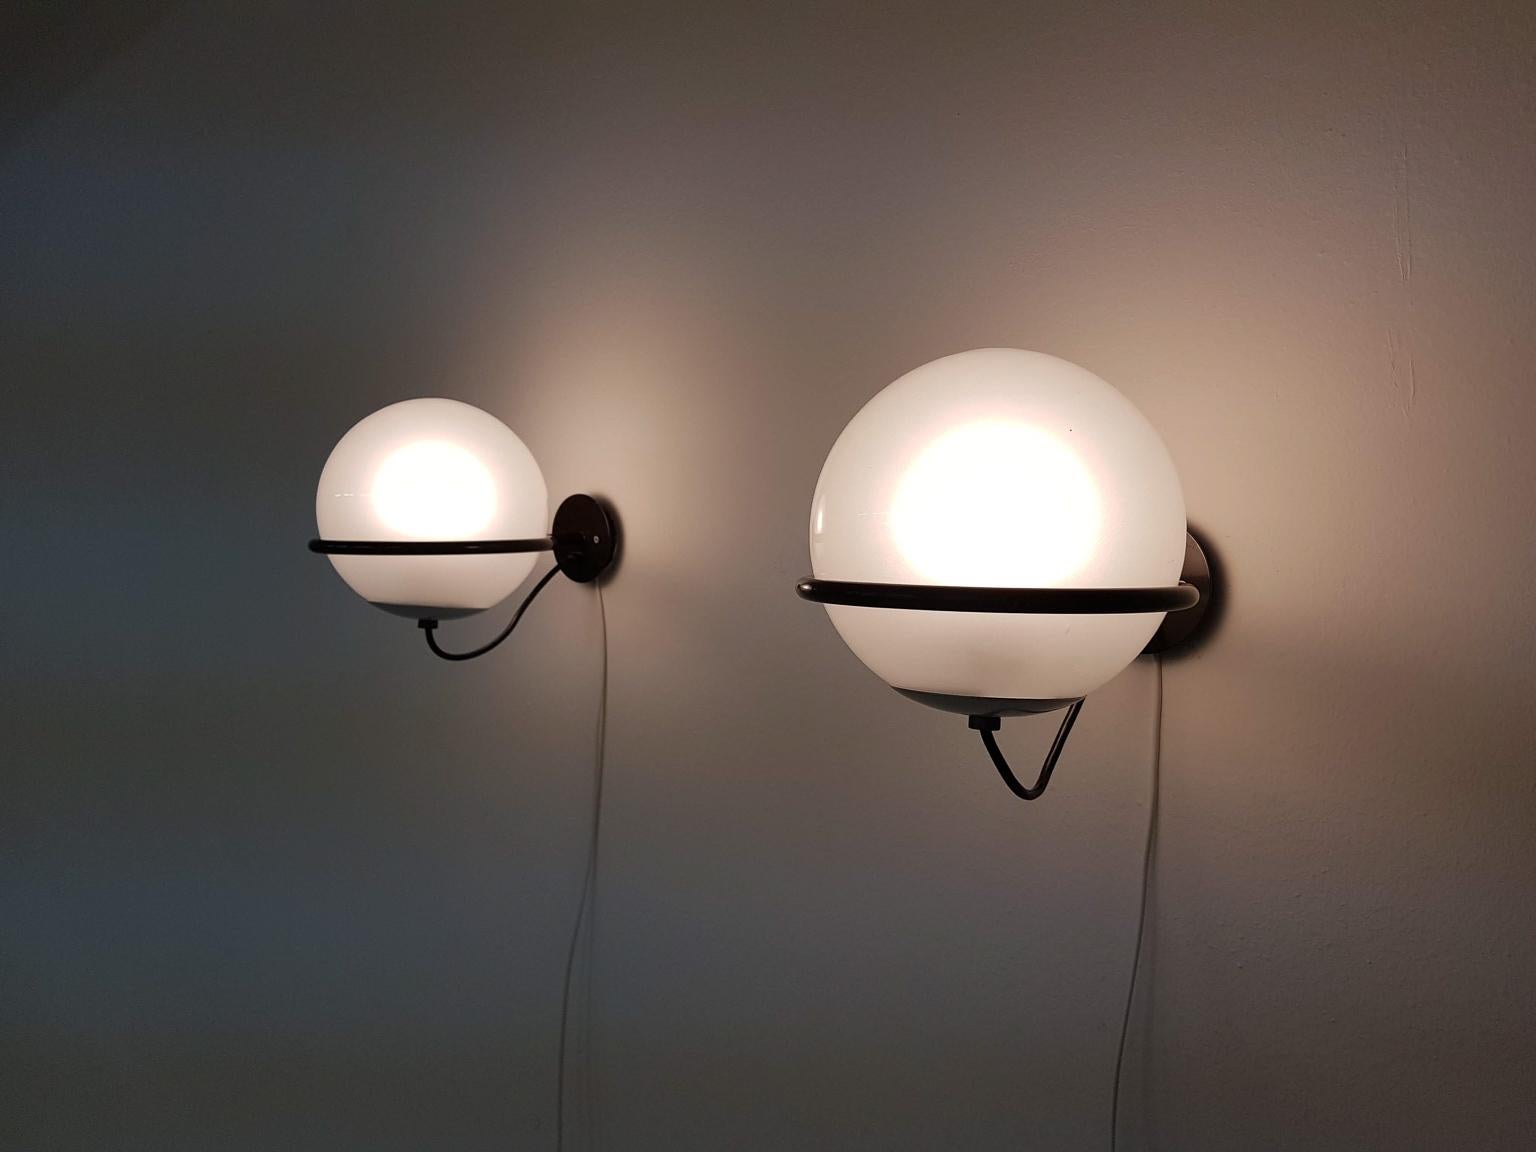 Authentic, vintage and matching pair of Model 238/1 wall lights or sconces by Italian master designer Gino Sarfatti for Arteluce, Italy 1959.

The lamp consists of a frosted glass globe which rests on a brown lacquered metal ring. Lamp and metal